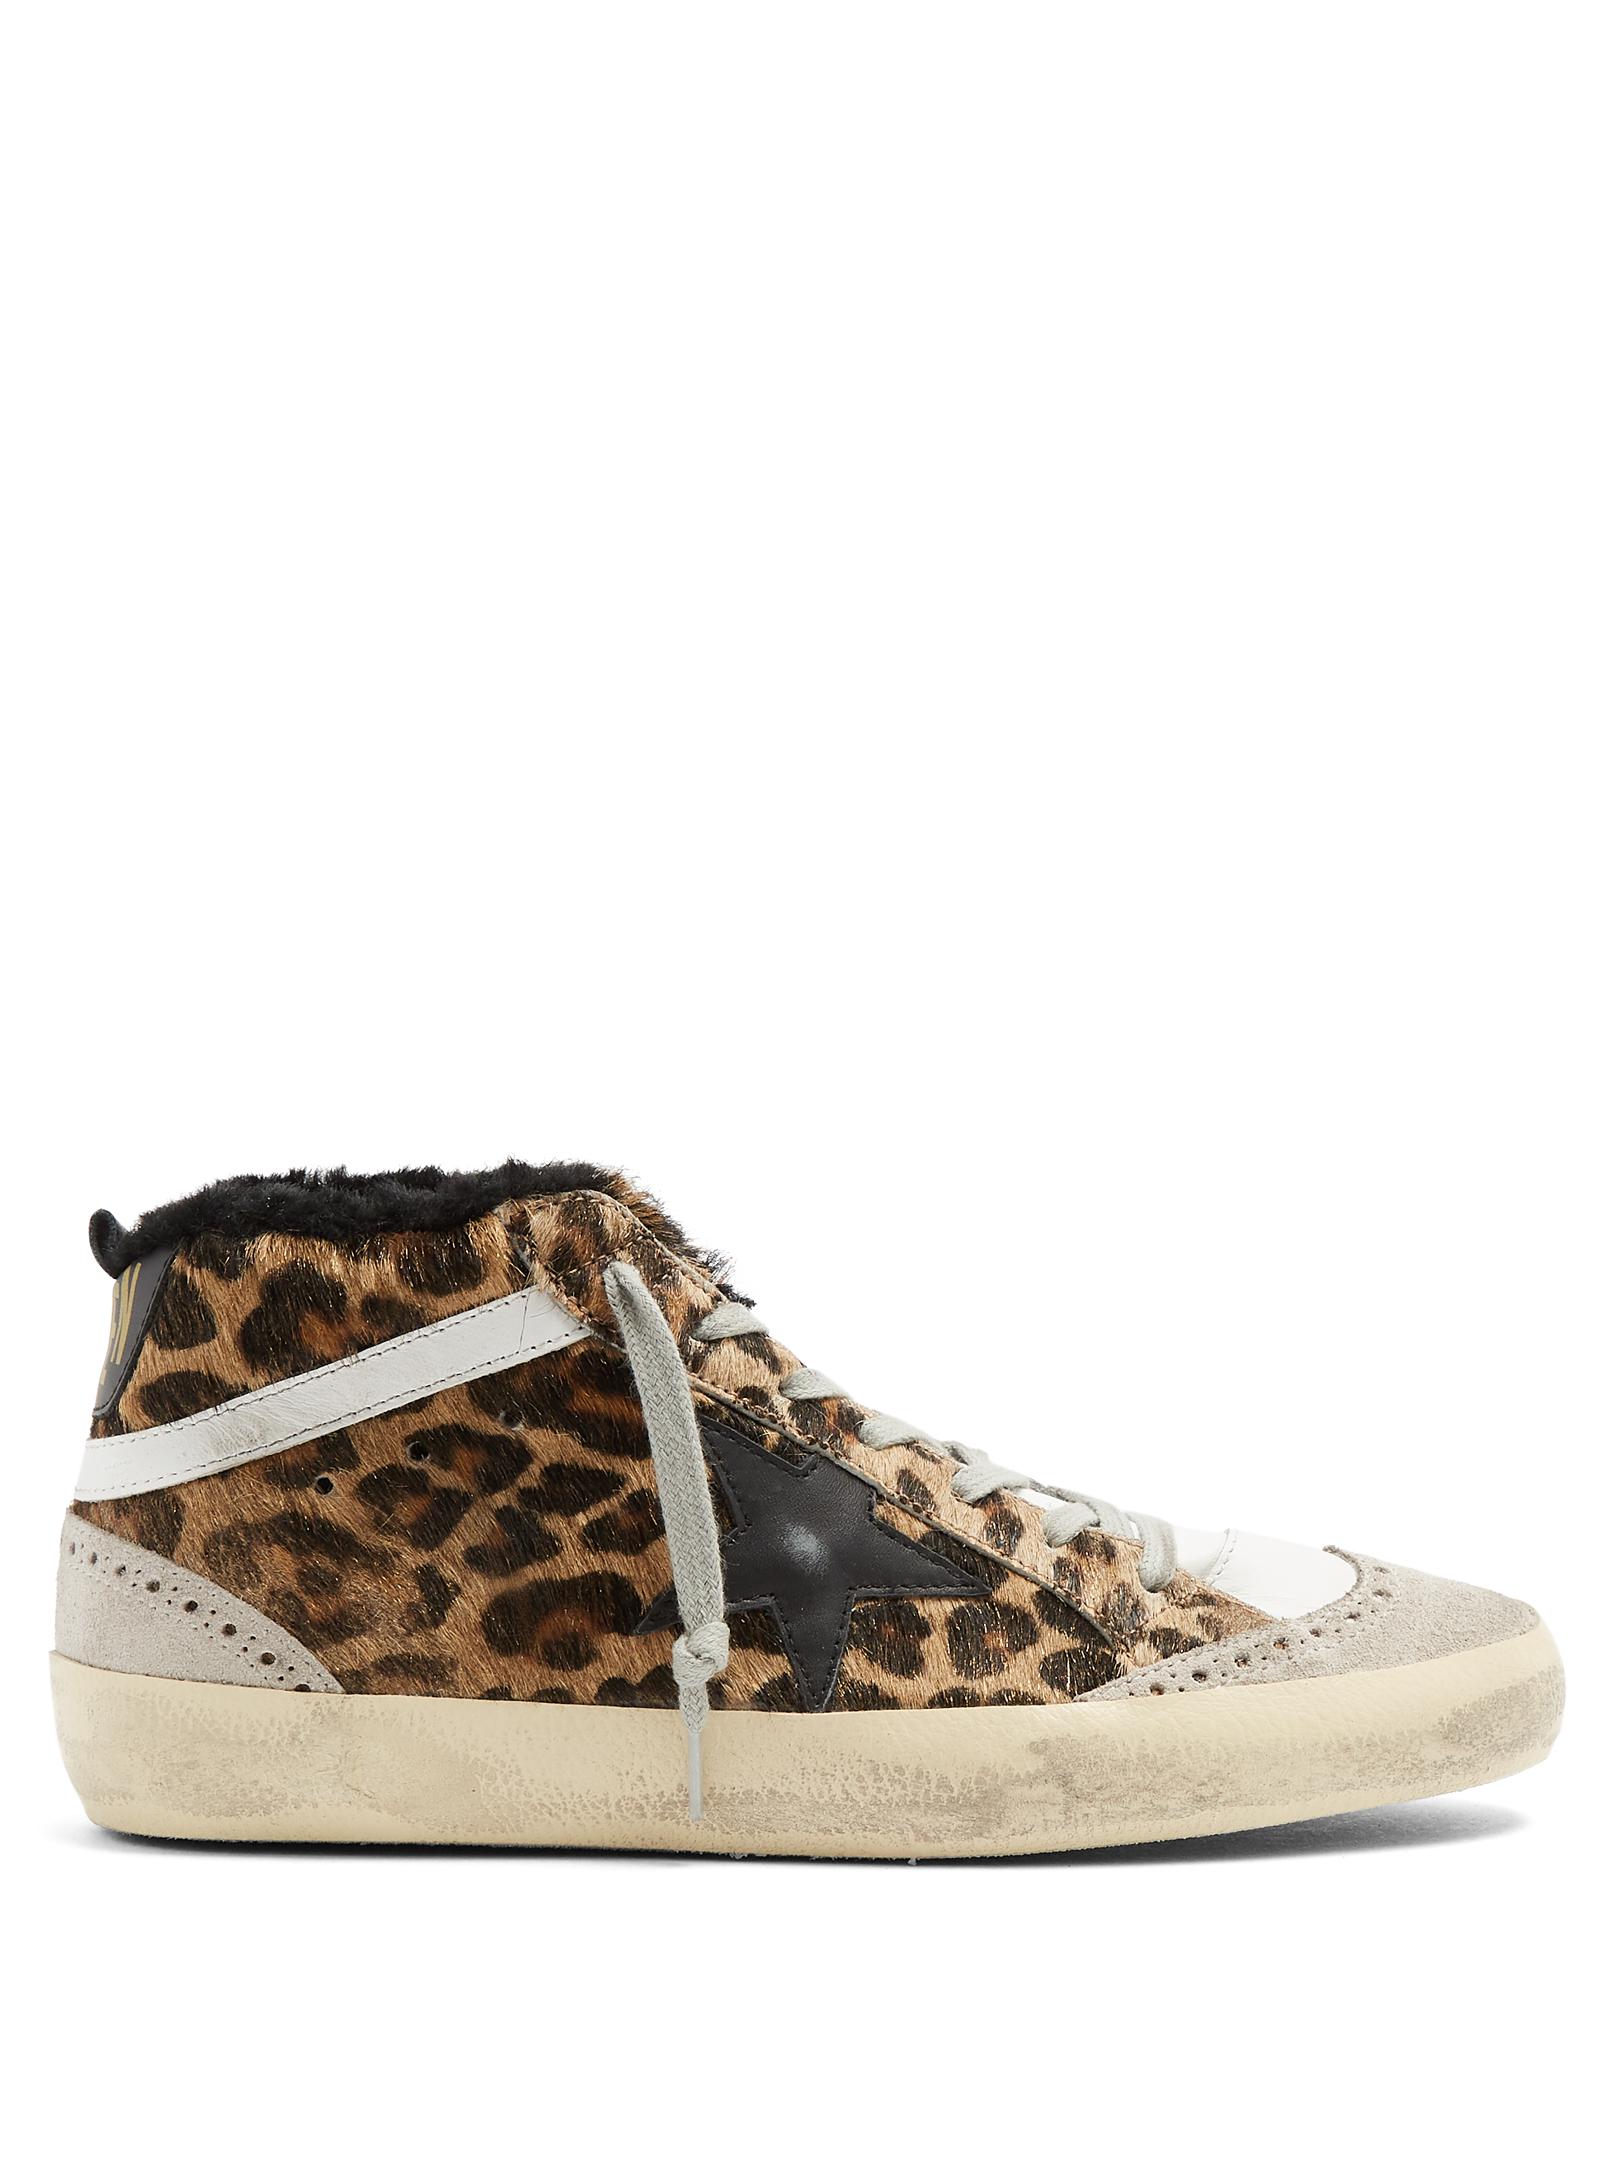 Lyst - Golden Goose Deluxe Brand Mid Star Leopard-print Shearling-lined ...